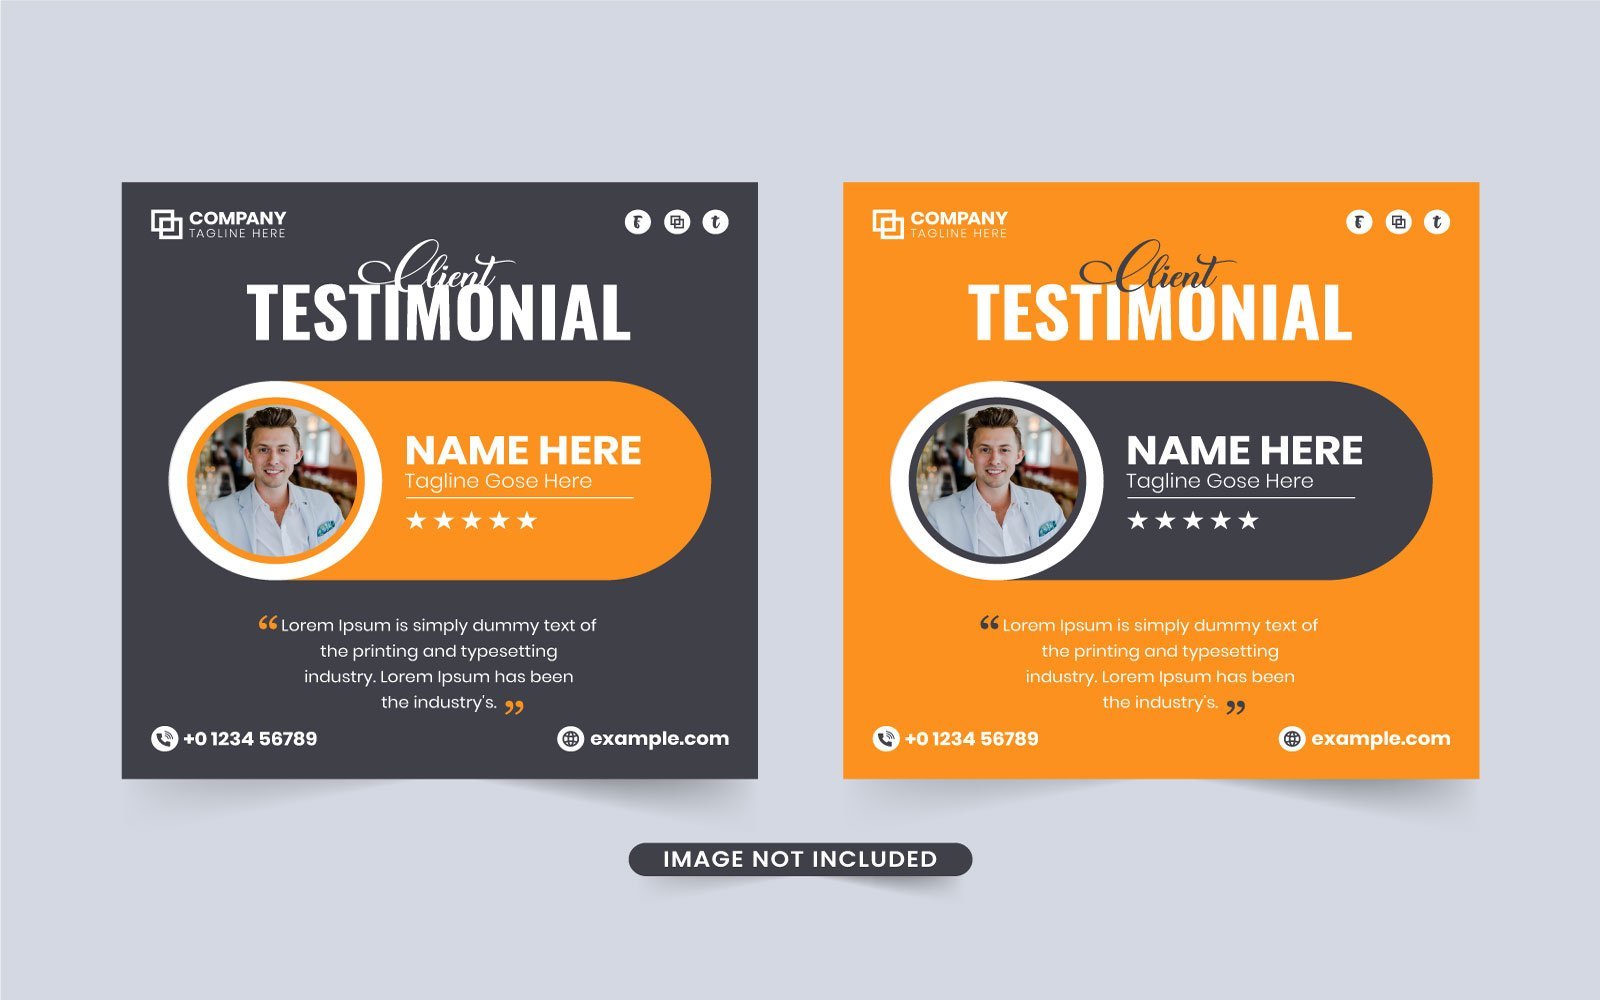 Template #273177 Review Customer Webdesign Template - Logo template Preview